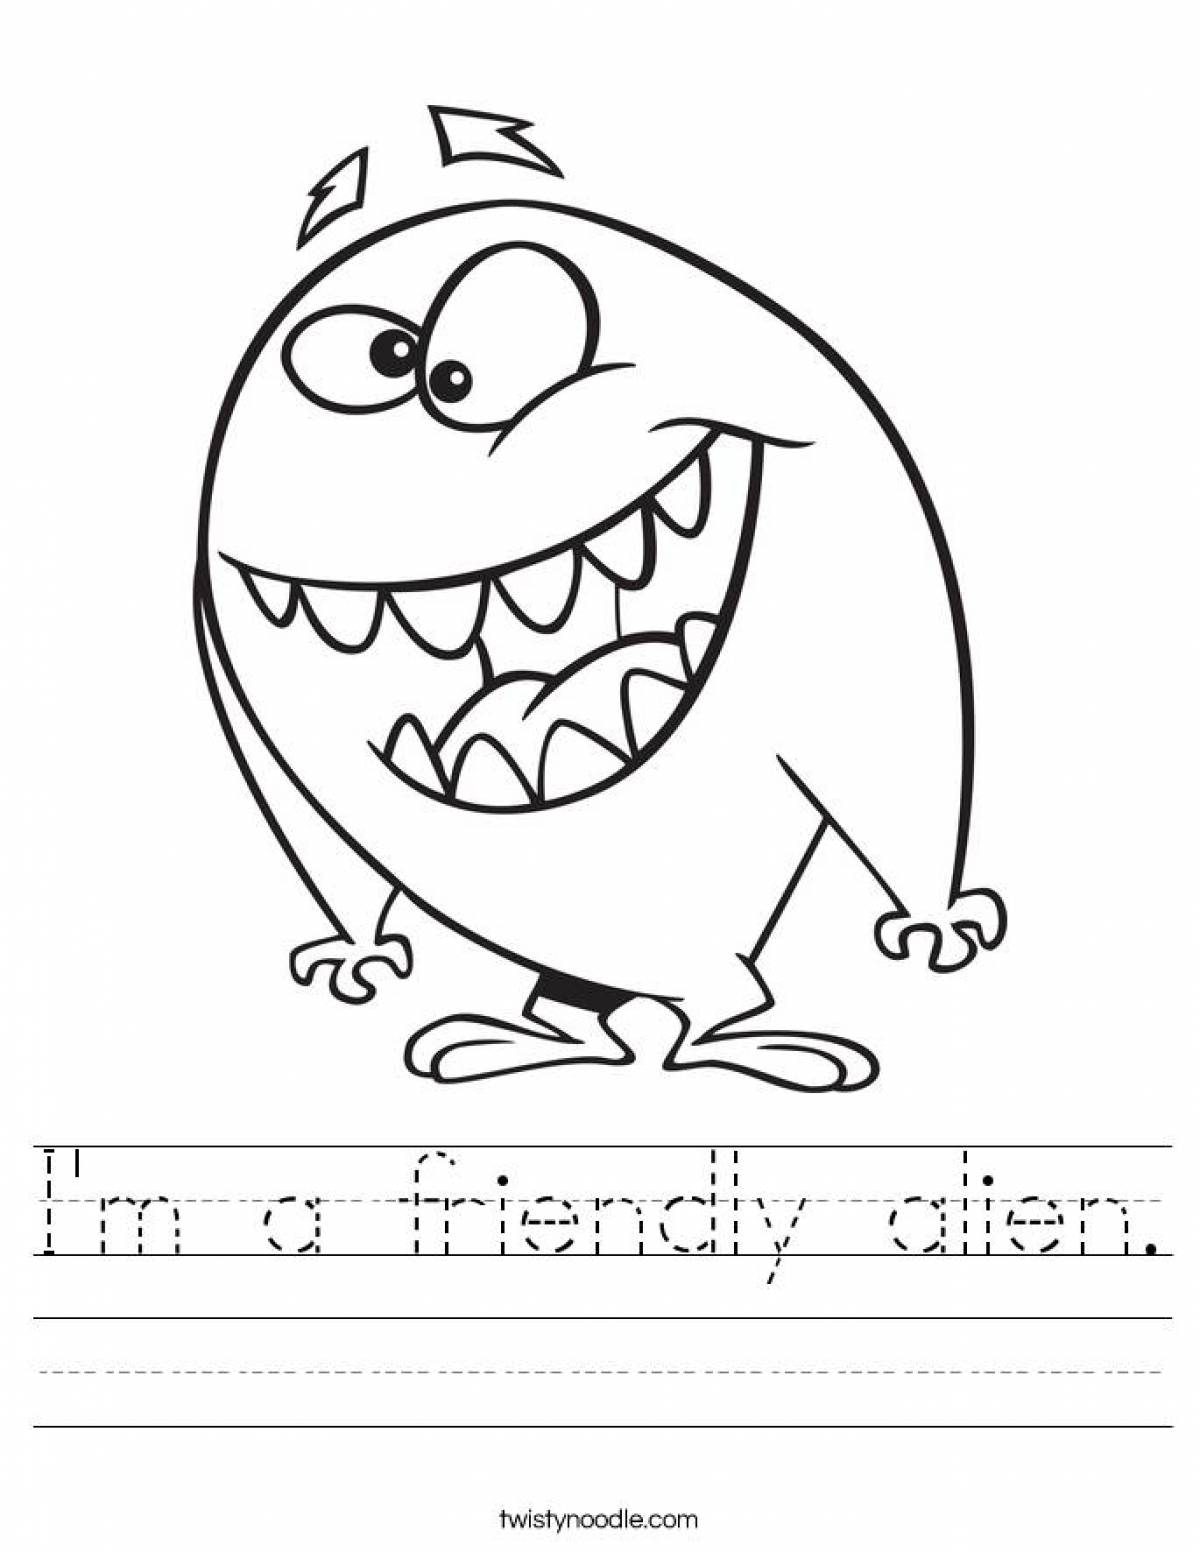 Nasty monster coloring pages